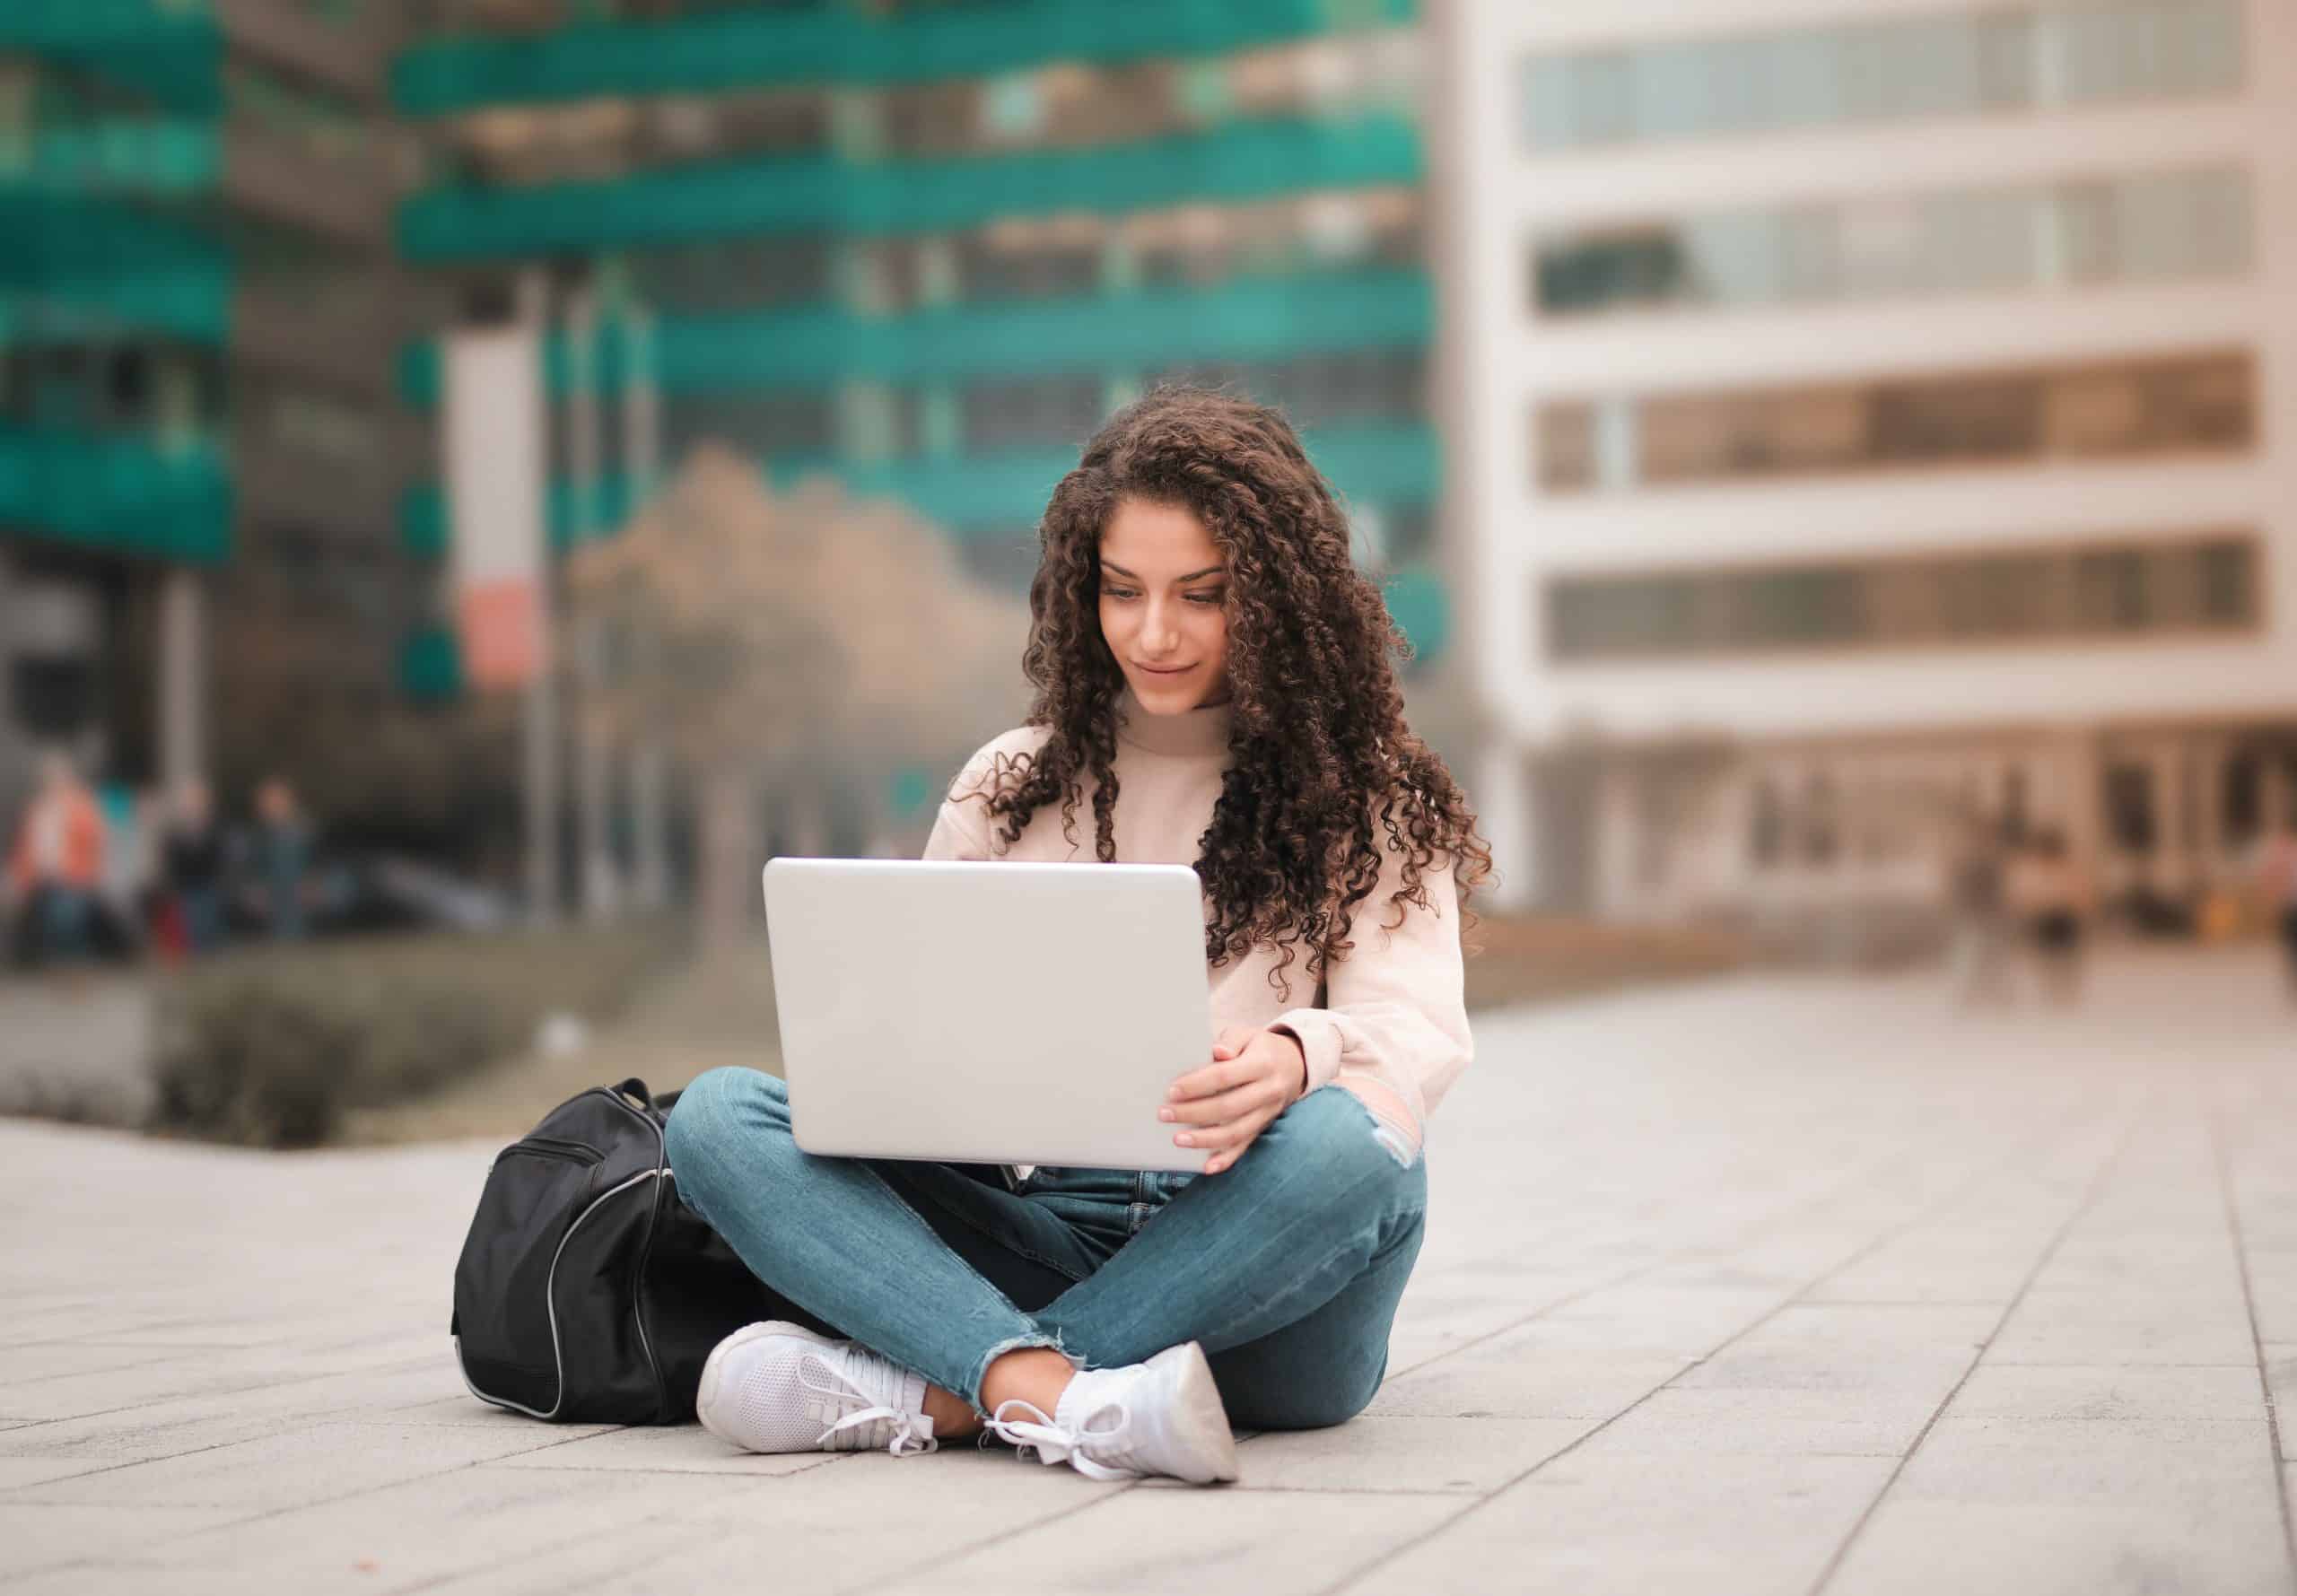 A young woman sitting cross-legged on the ground using a laptop with buildings in the background, working on her Canada study permit application.